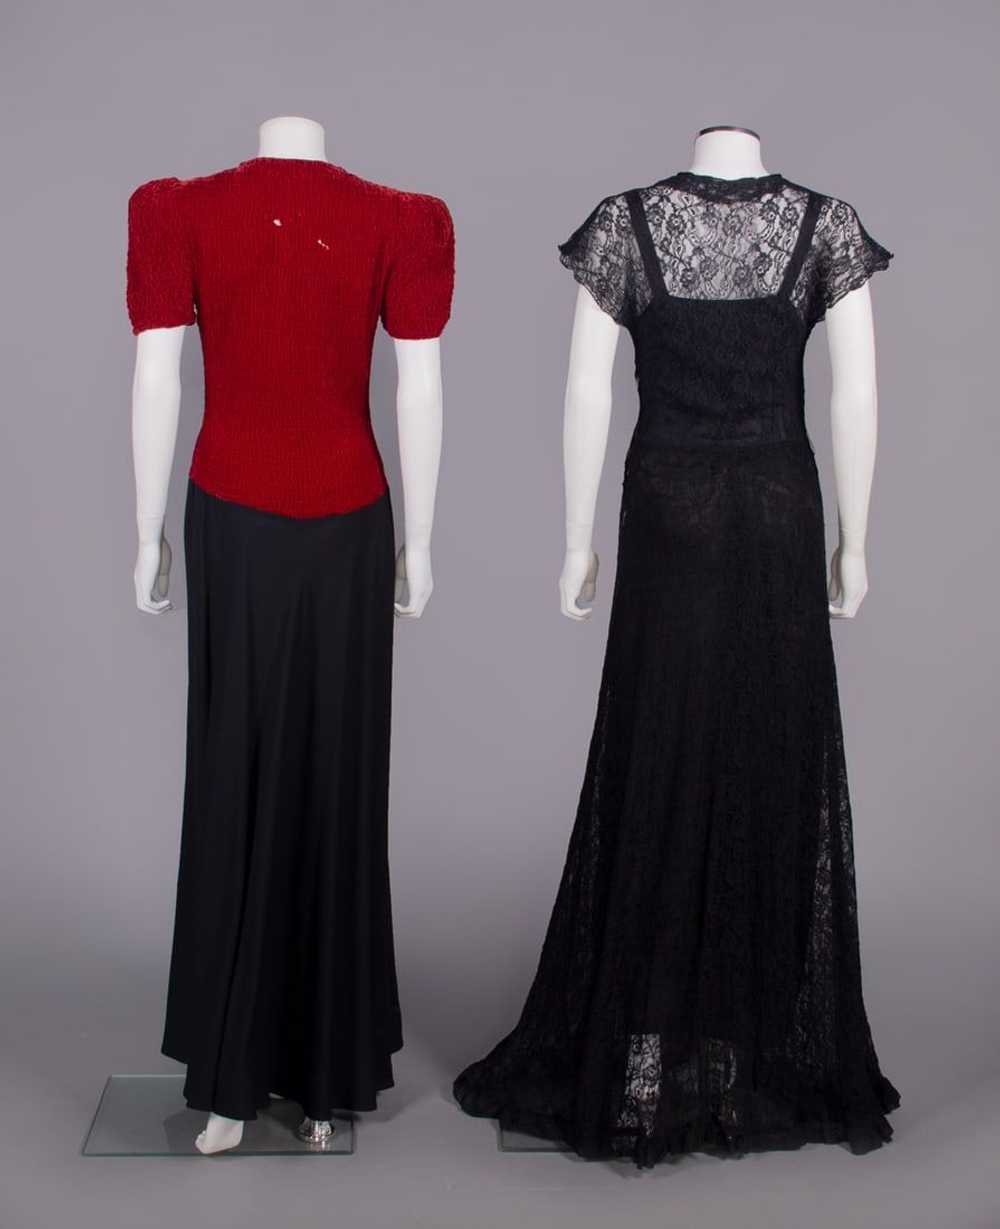 TWO SILK OR LACE EVENING GOWNS, LATE 1930s - image 4